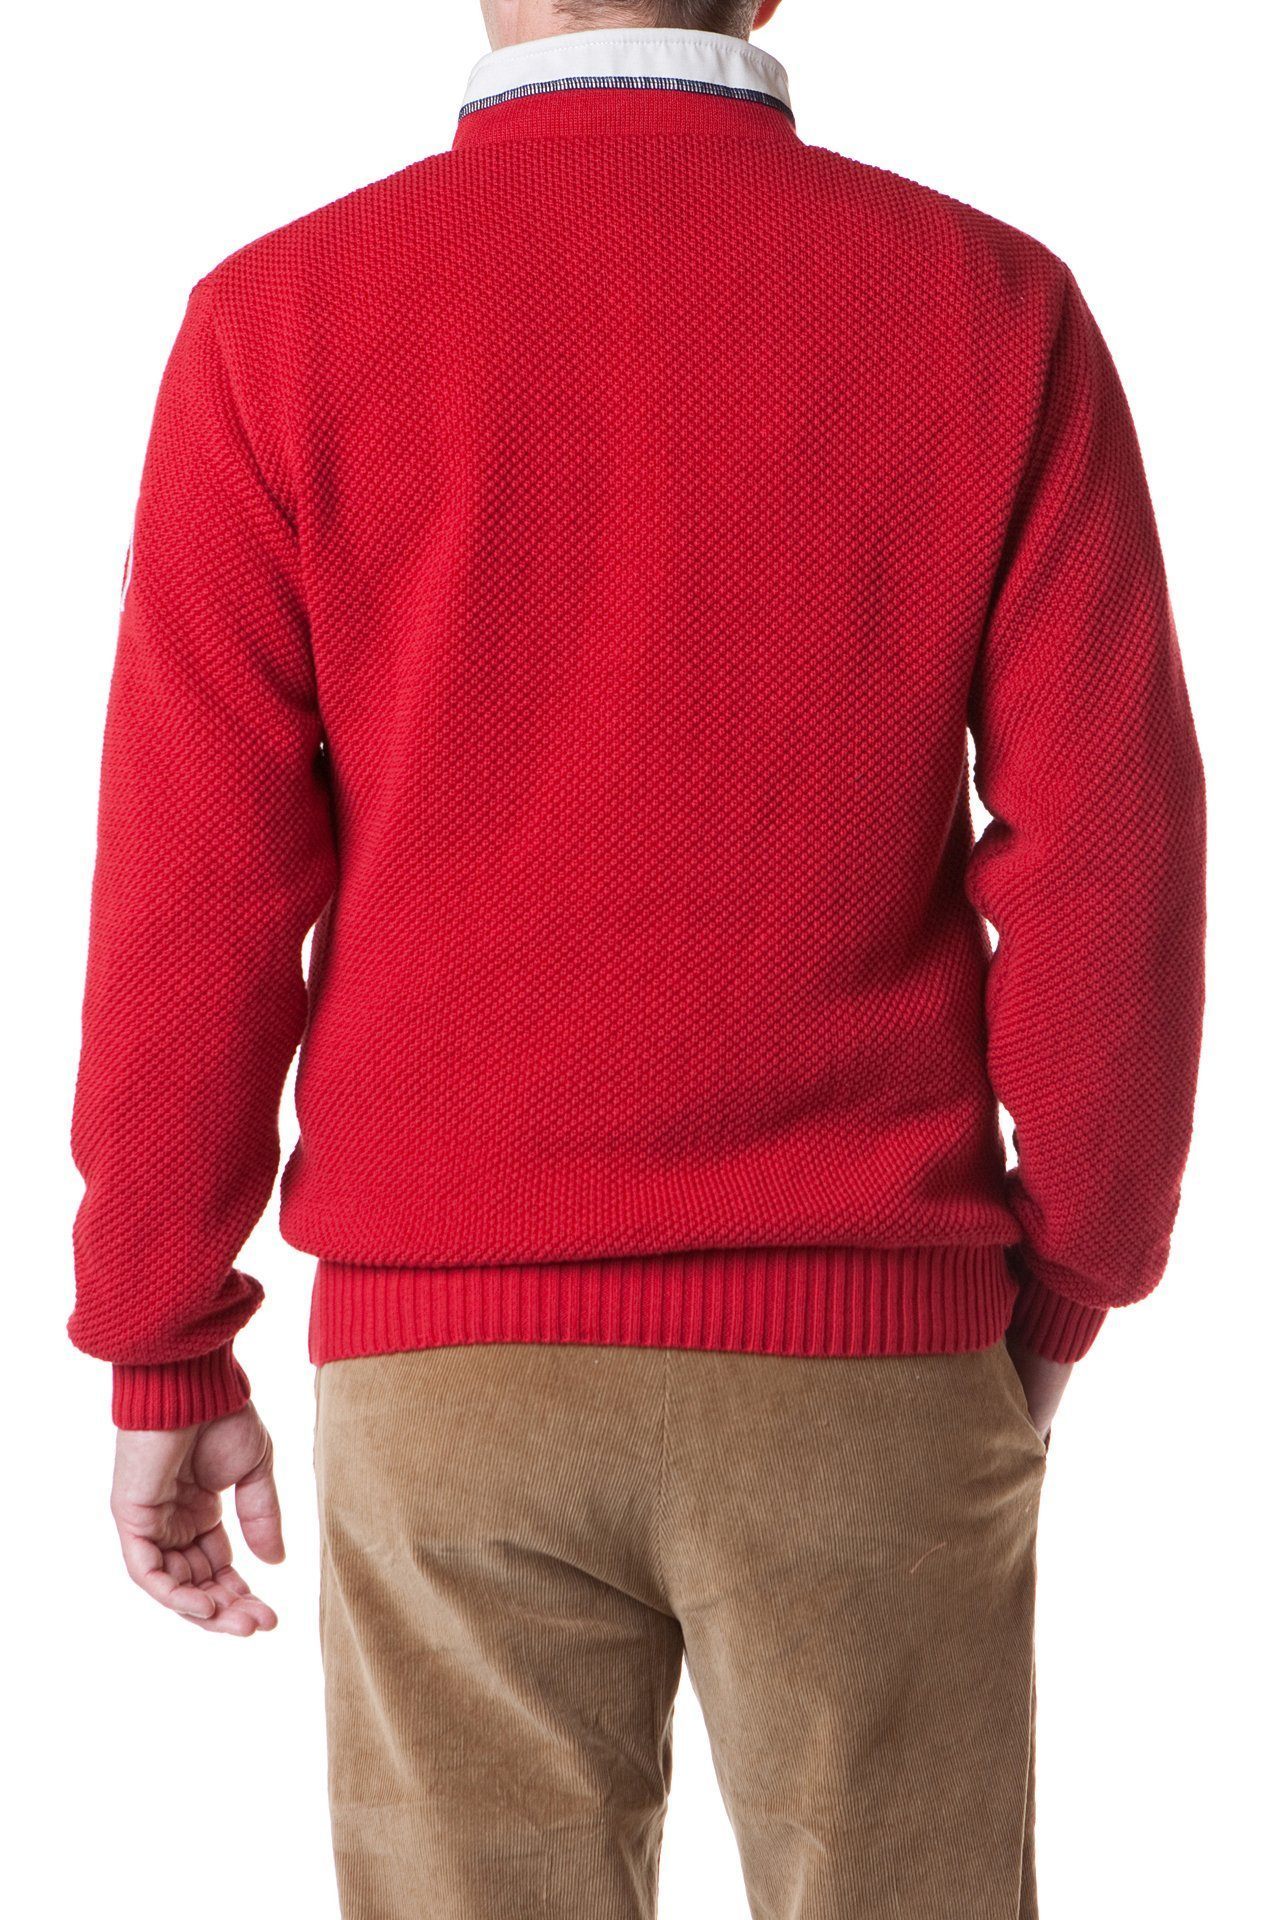 Holebrook Sweater Classic WP Red - MENS OUTERWEAR - Castaway Nantucket Island